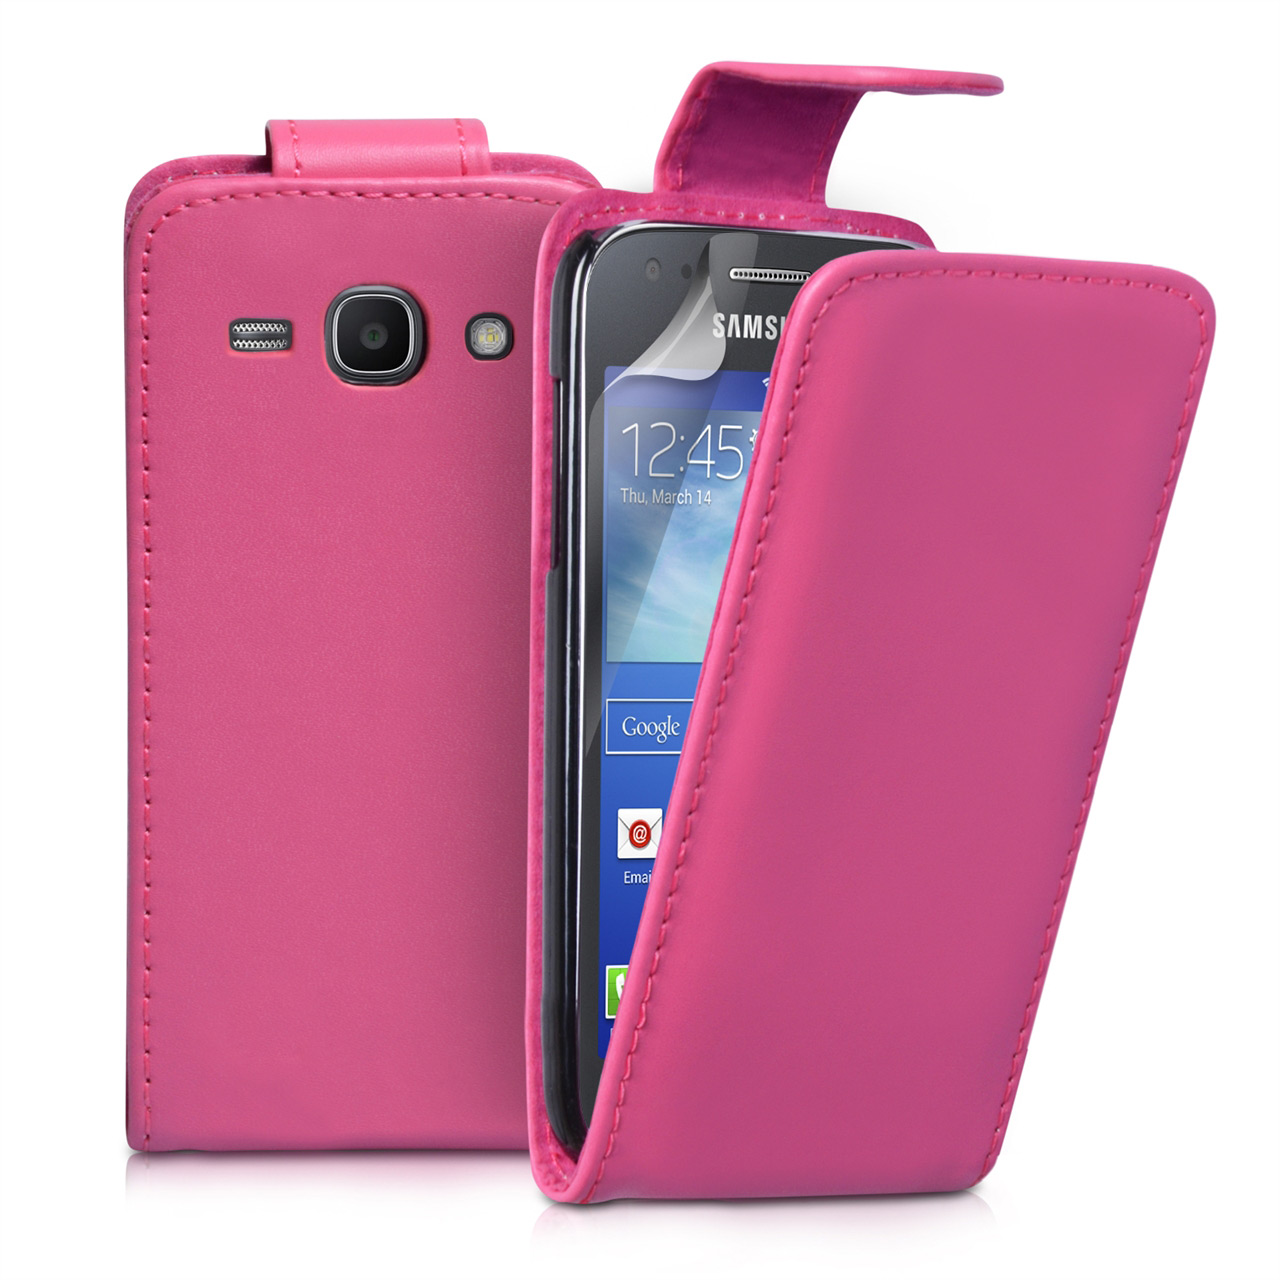 YouSave Samsung Galaxy Ace 3 Leather-Effect Flip Case - Hot Pink